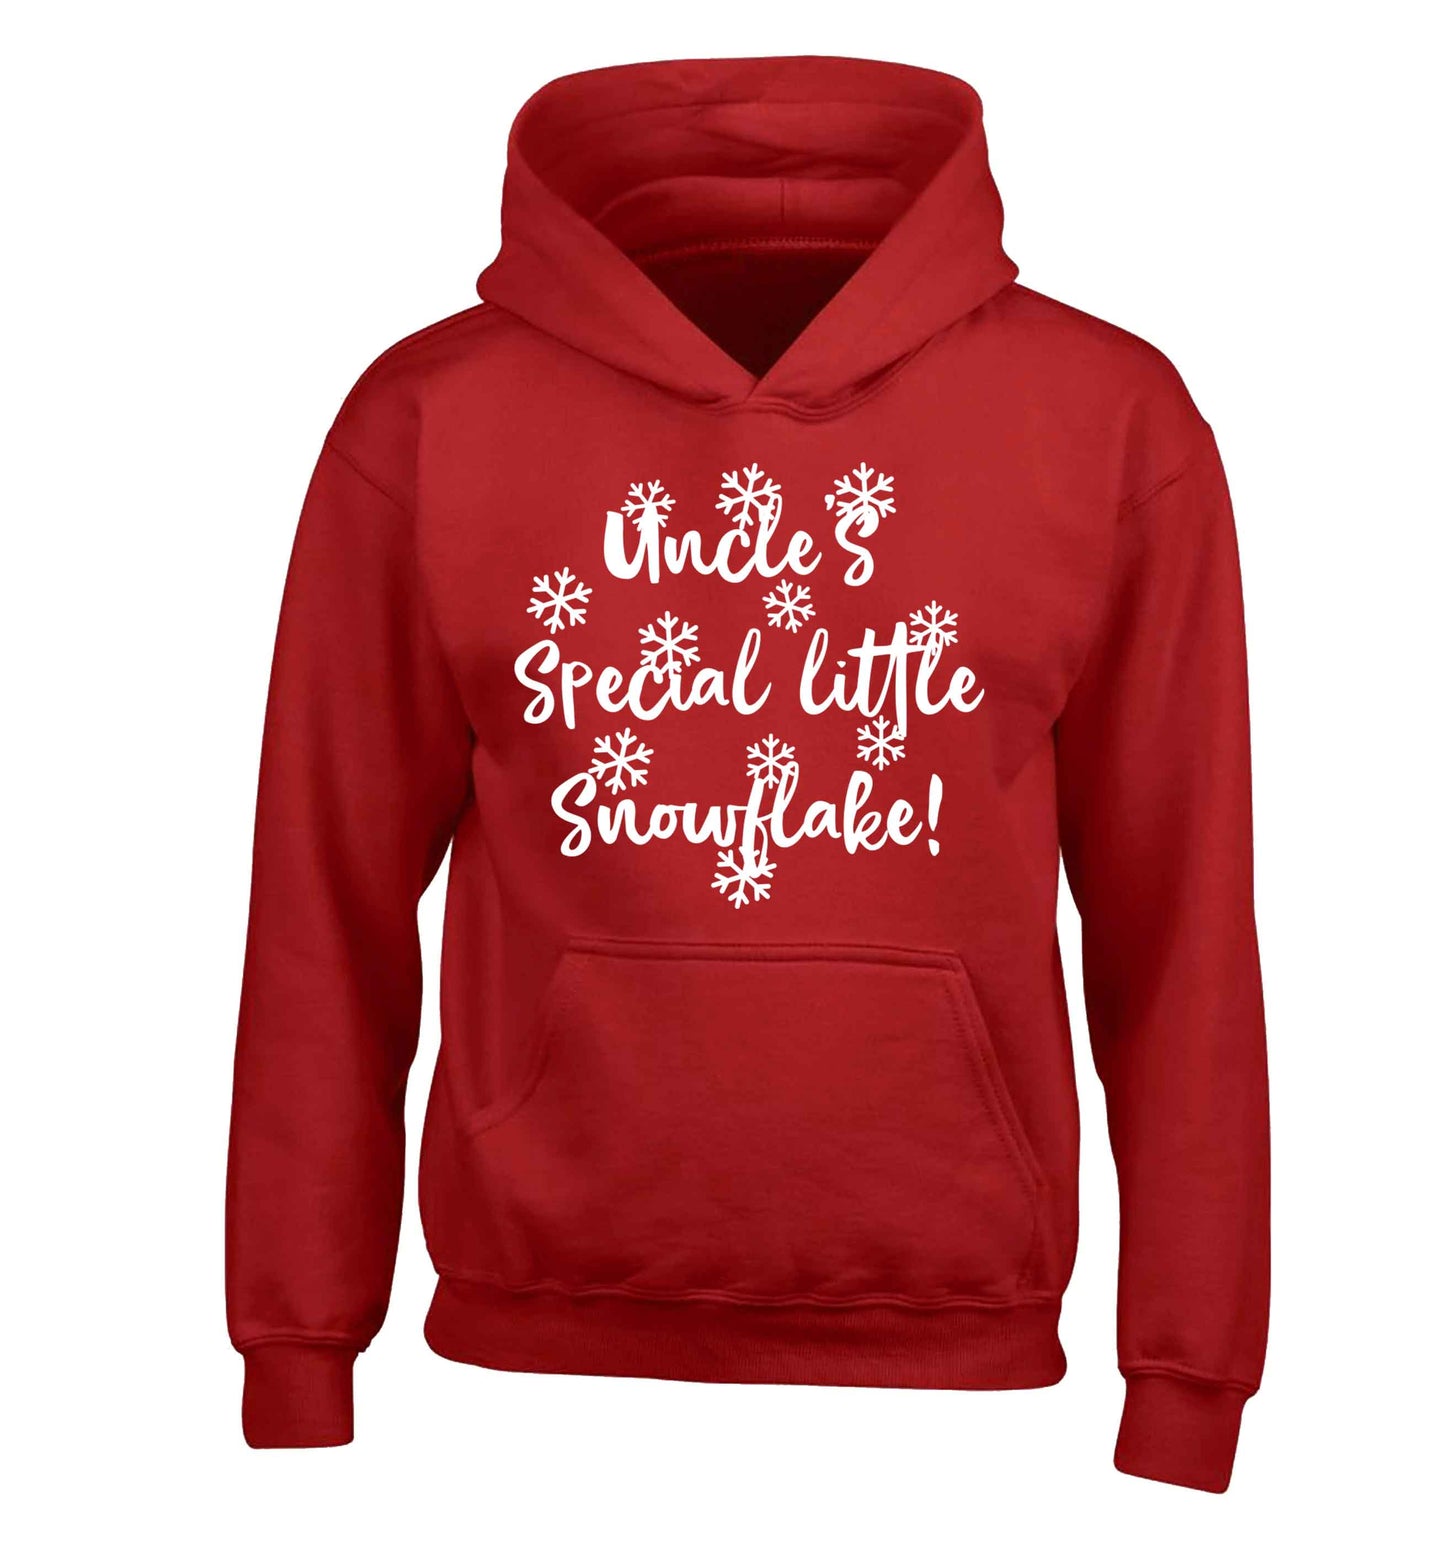 Uncle's special little snowflake children's red hoodie 12-13 Years